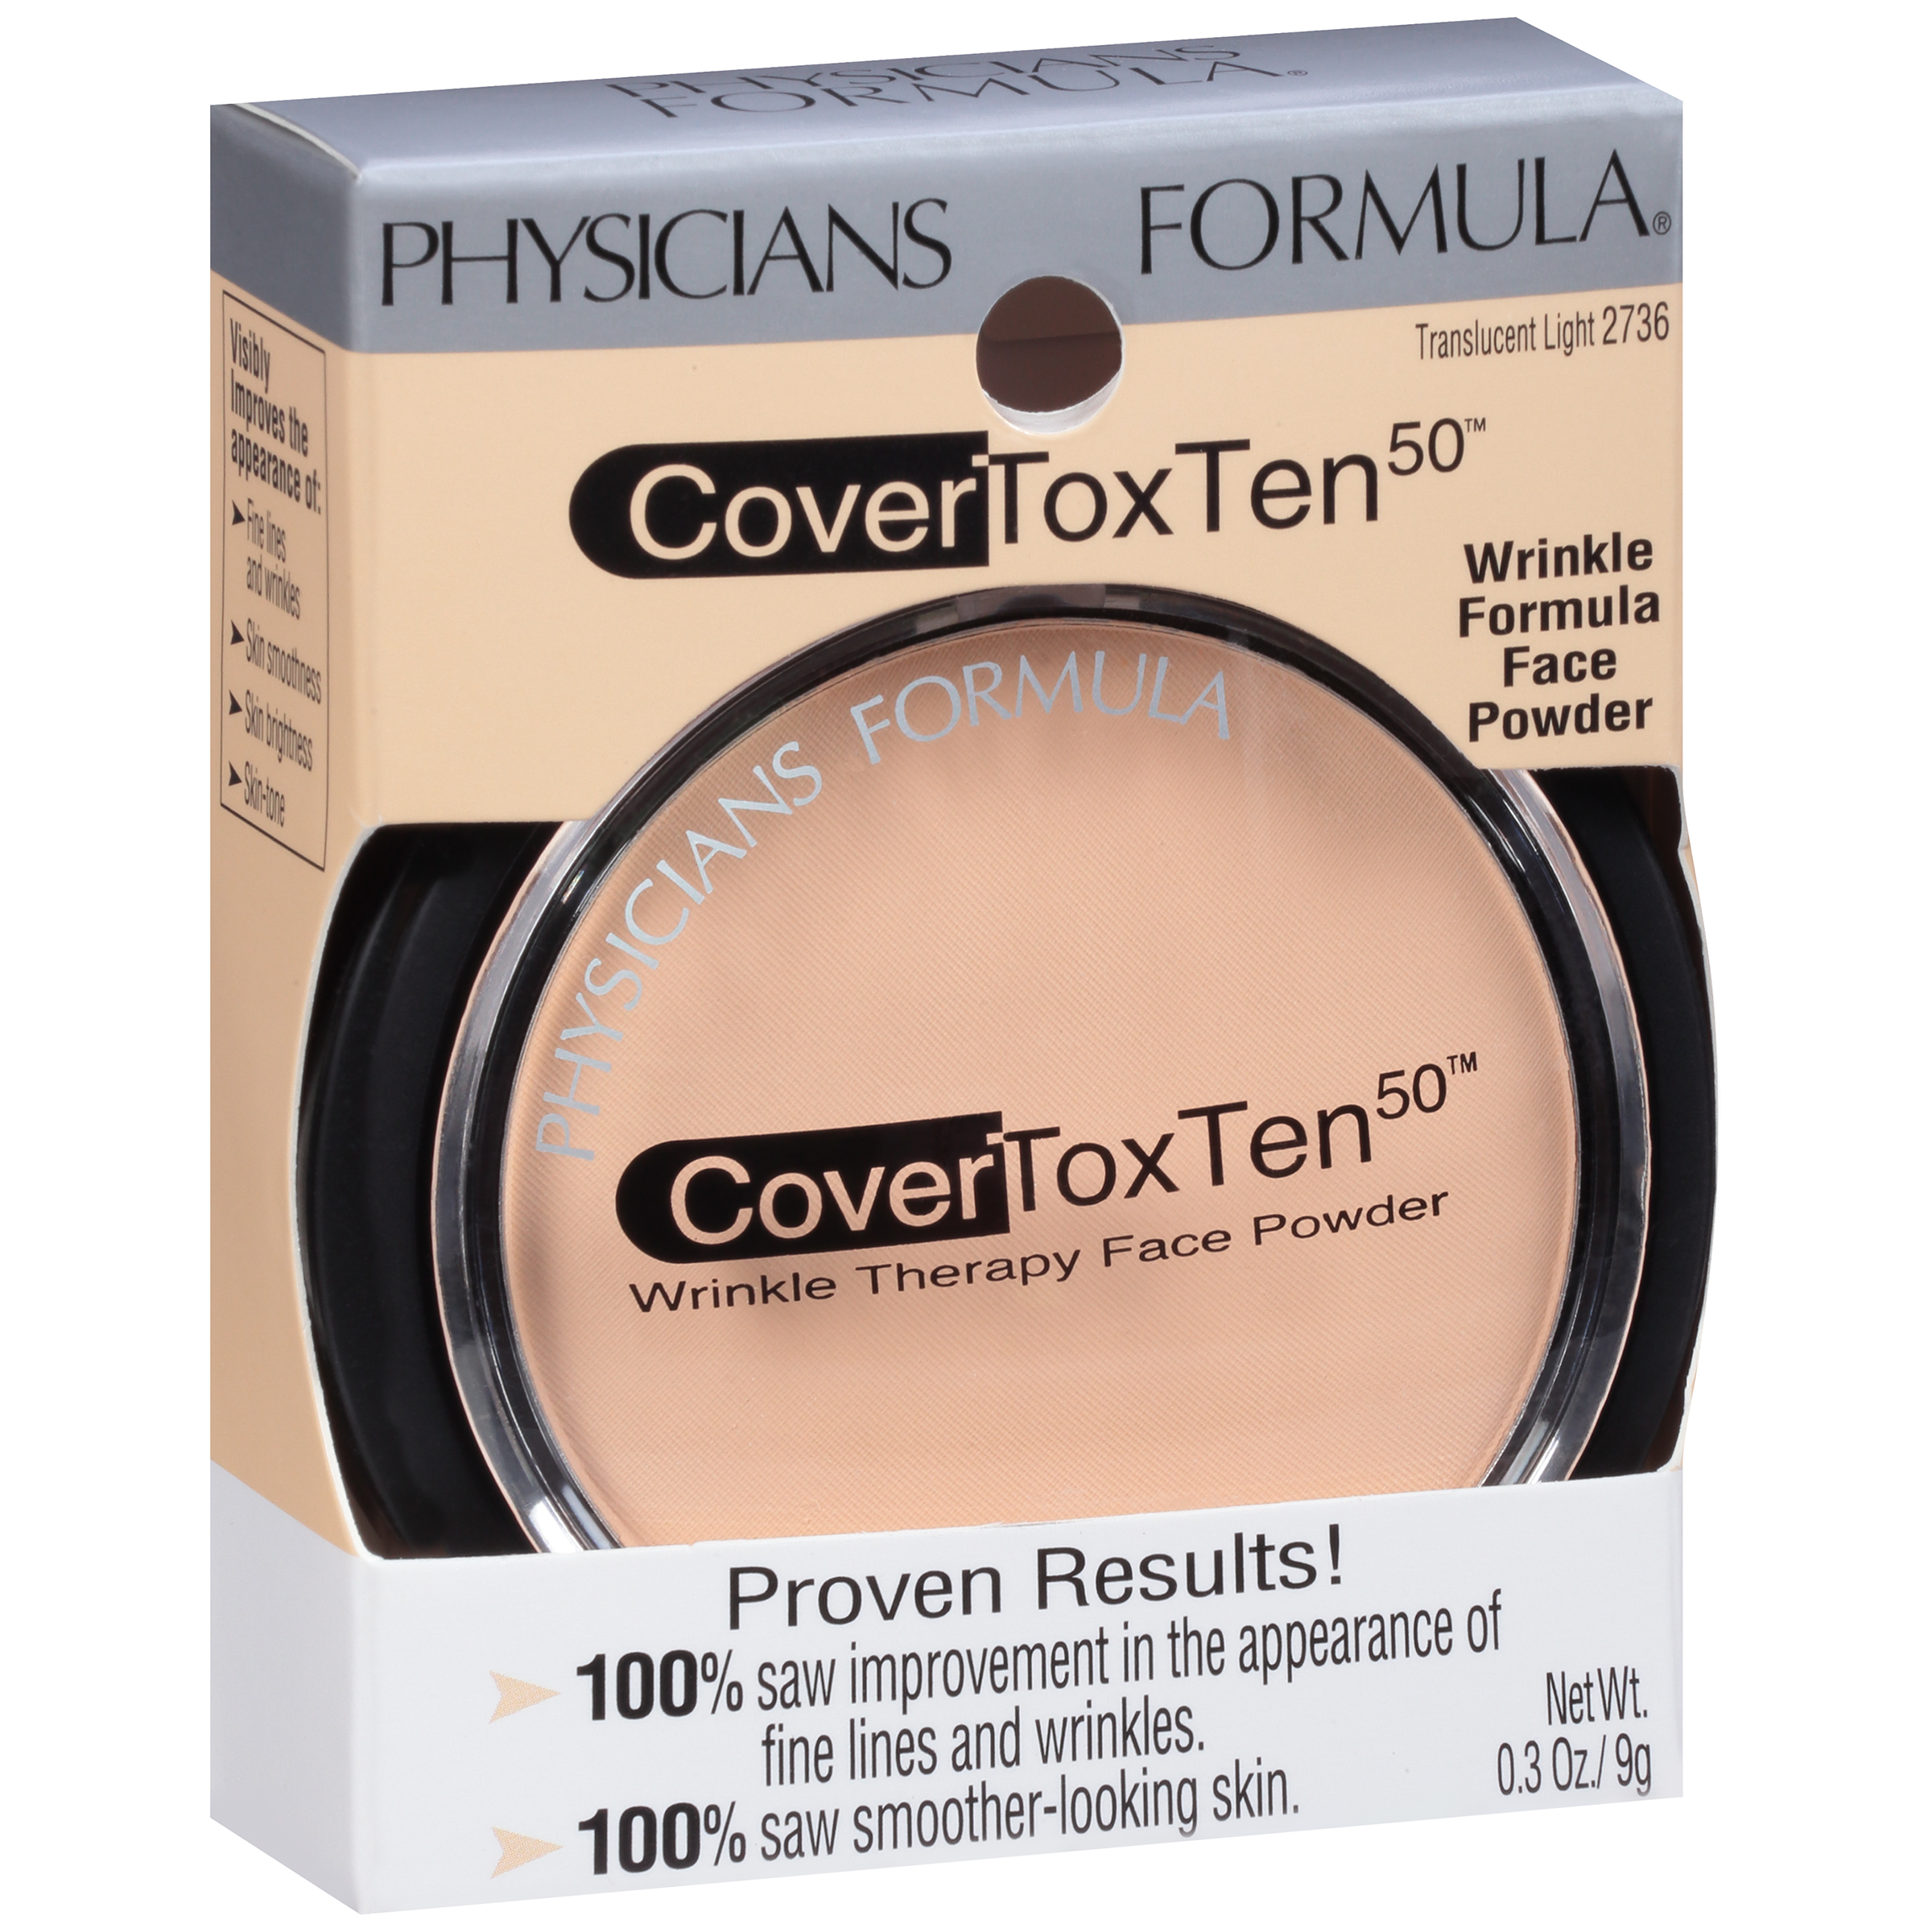 Physicians Formula Covertoxten50 Wrinkle Therapy Face Powder